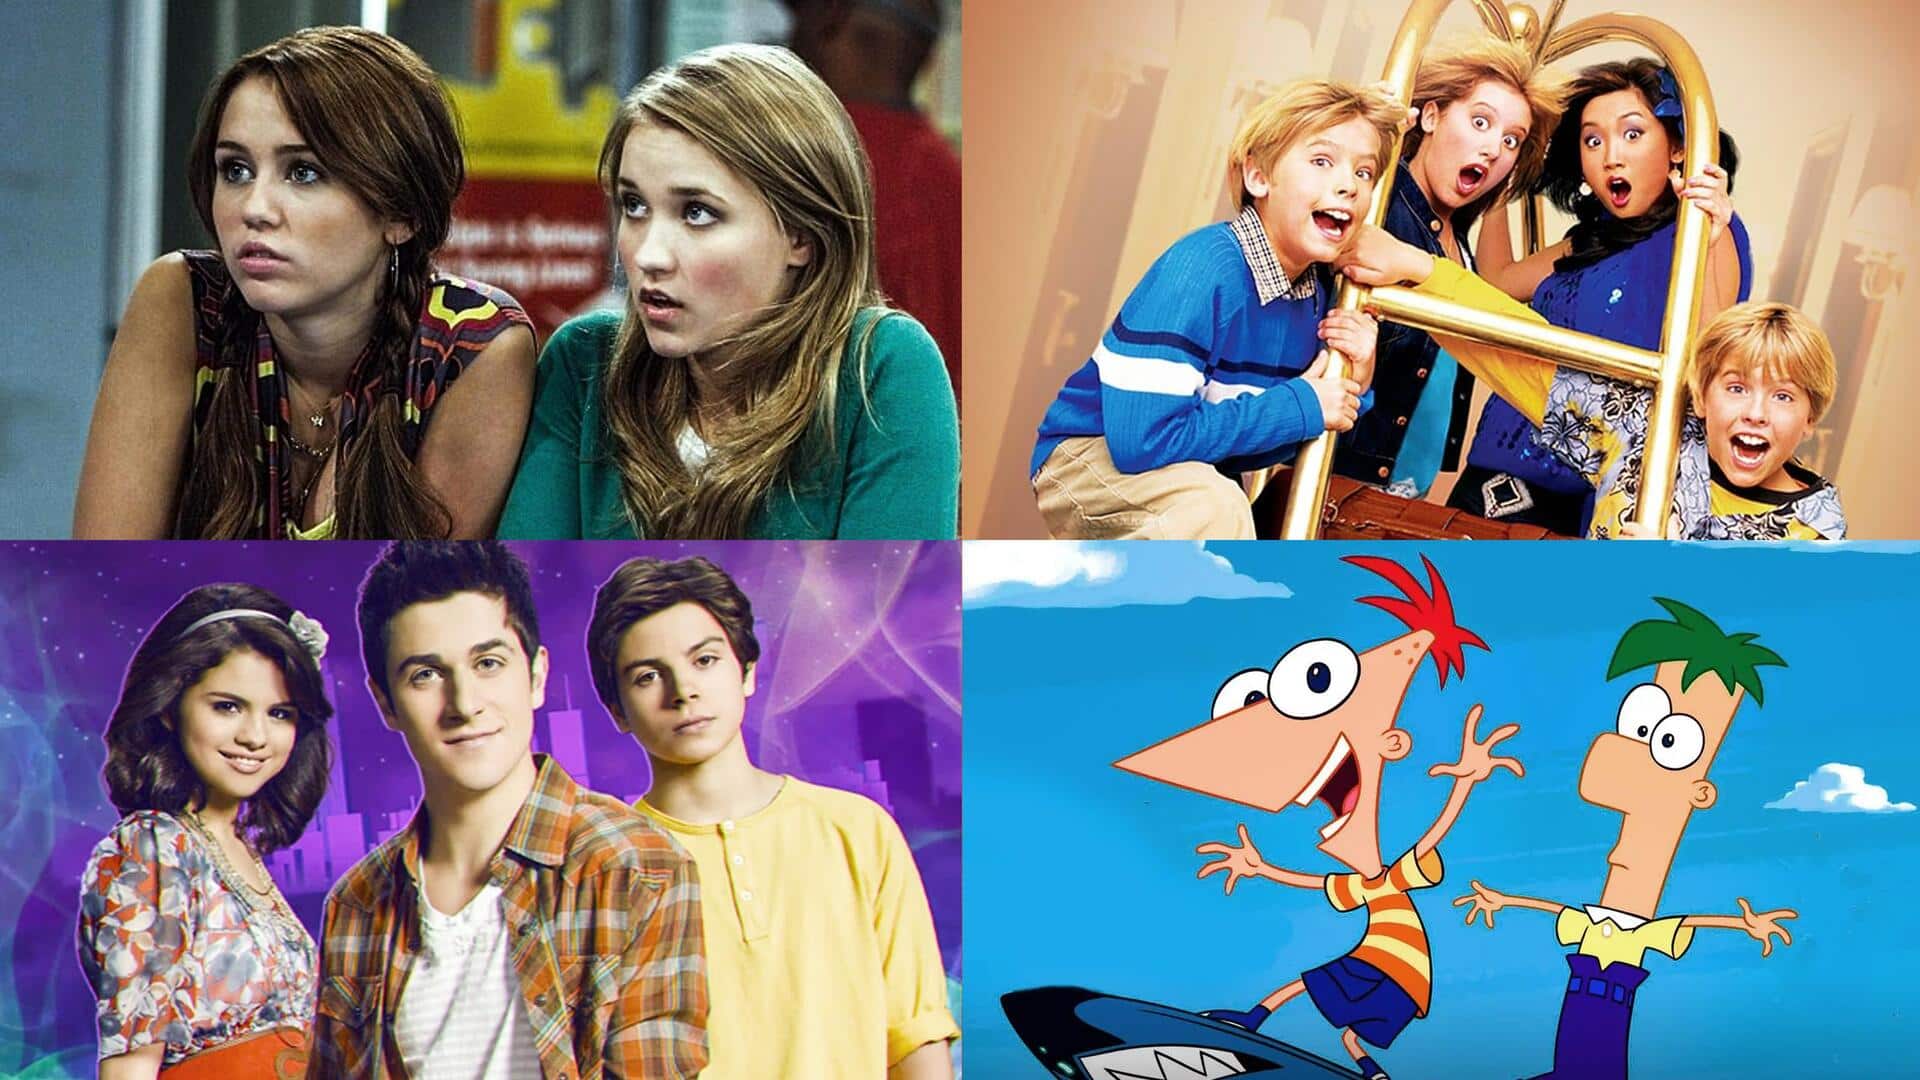 'Hannah Montana' to 'Phineas & Ferb': Most popular Disney shows